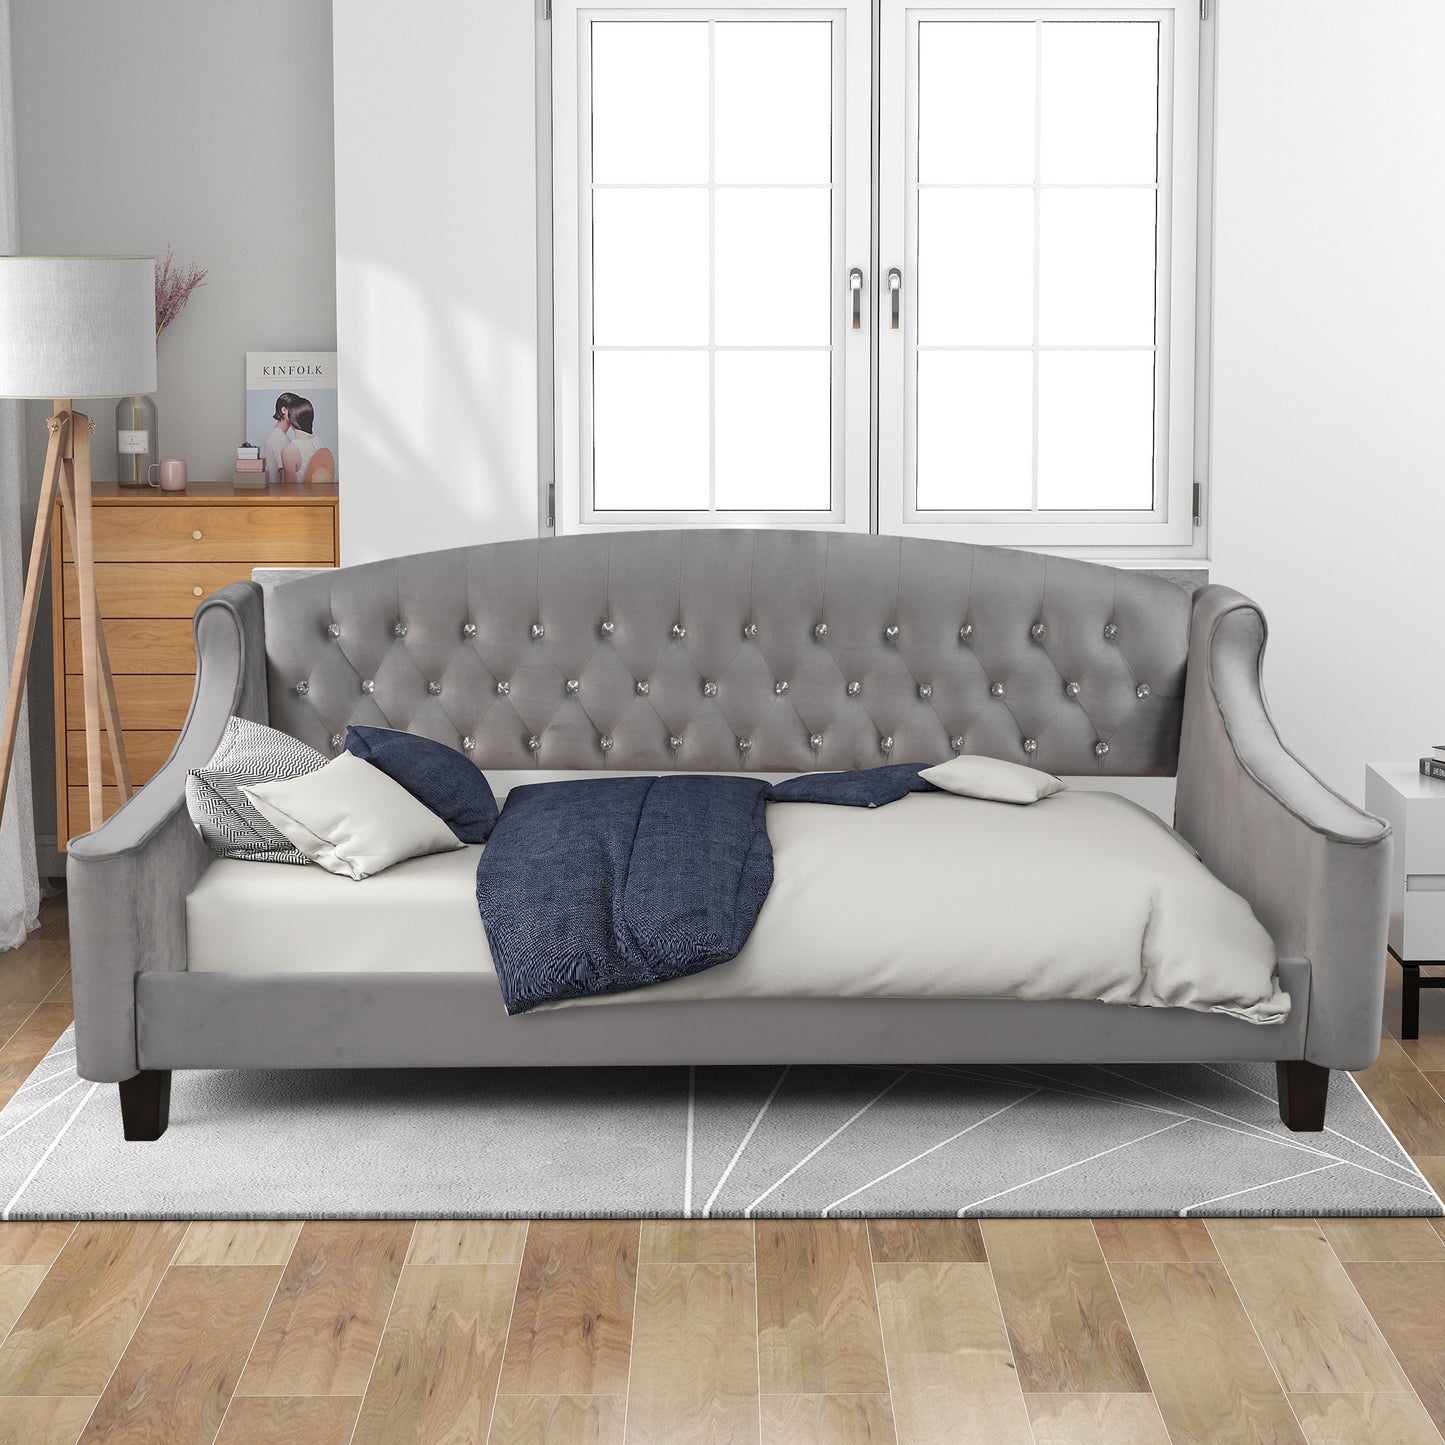 Modern Luxury Tufted Button Daybed,Twin,Gray